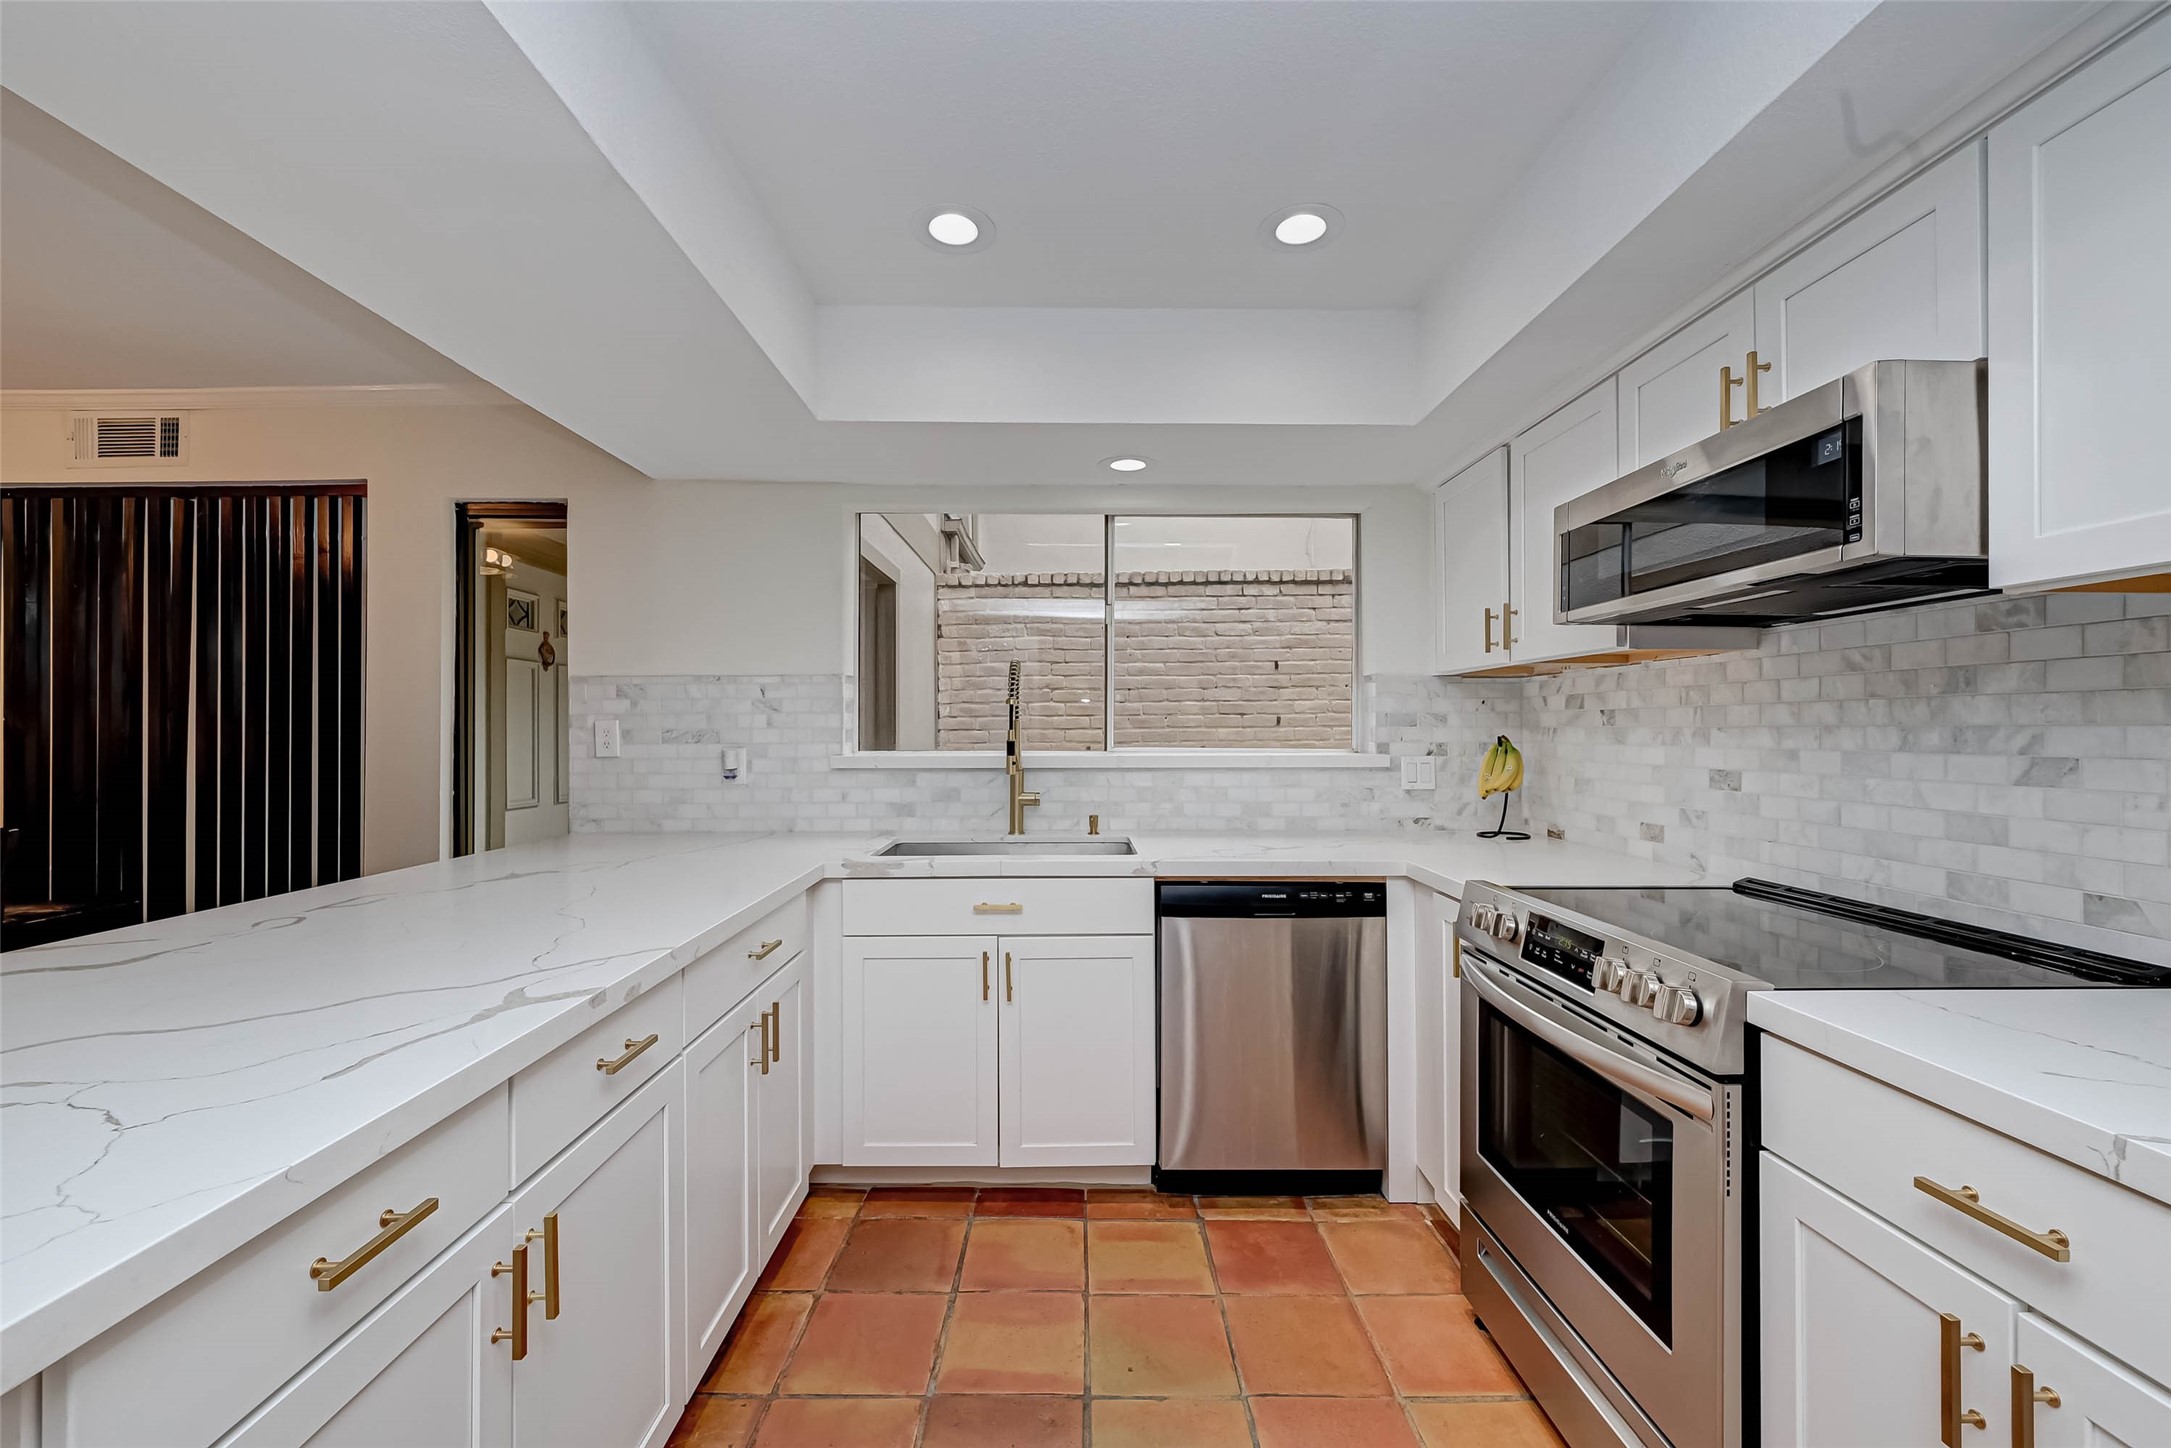 No expense was spared in the remodel of this townhome, in the kitchen especially. Beautiful quartz countertops, white cabinets with gold hardware and stainless steel appliances.